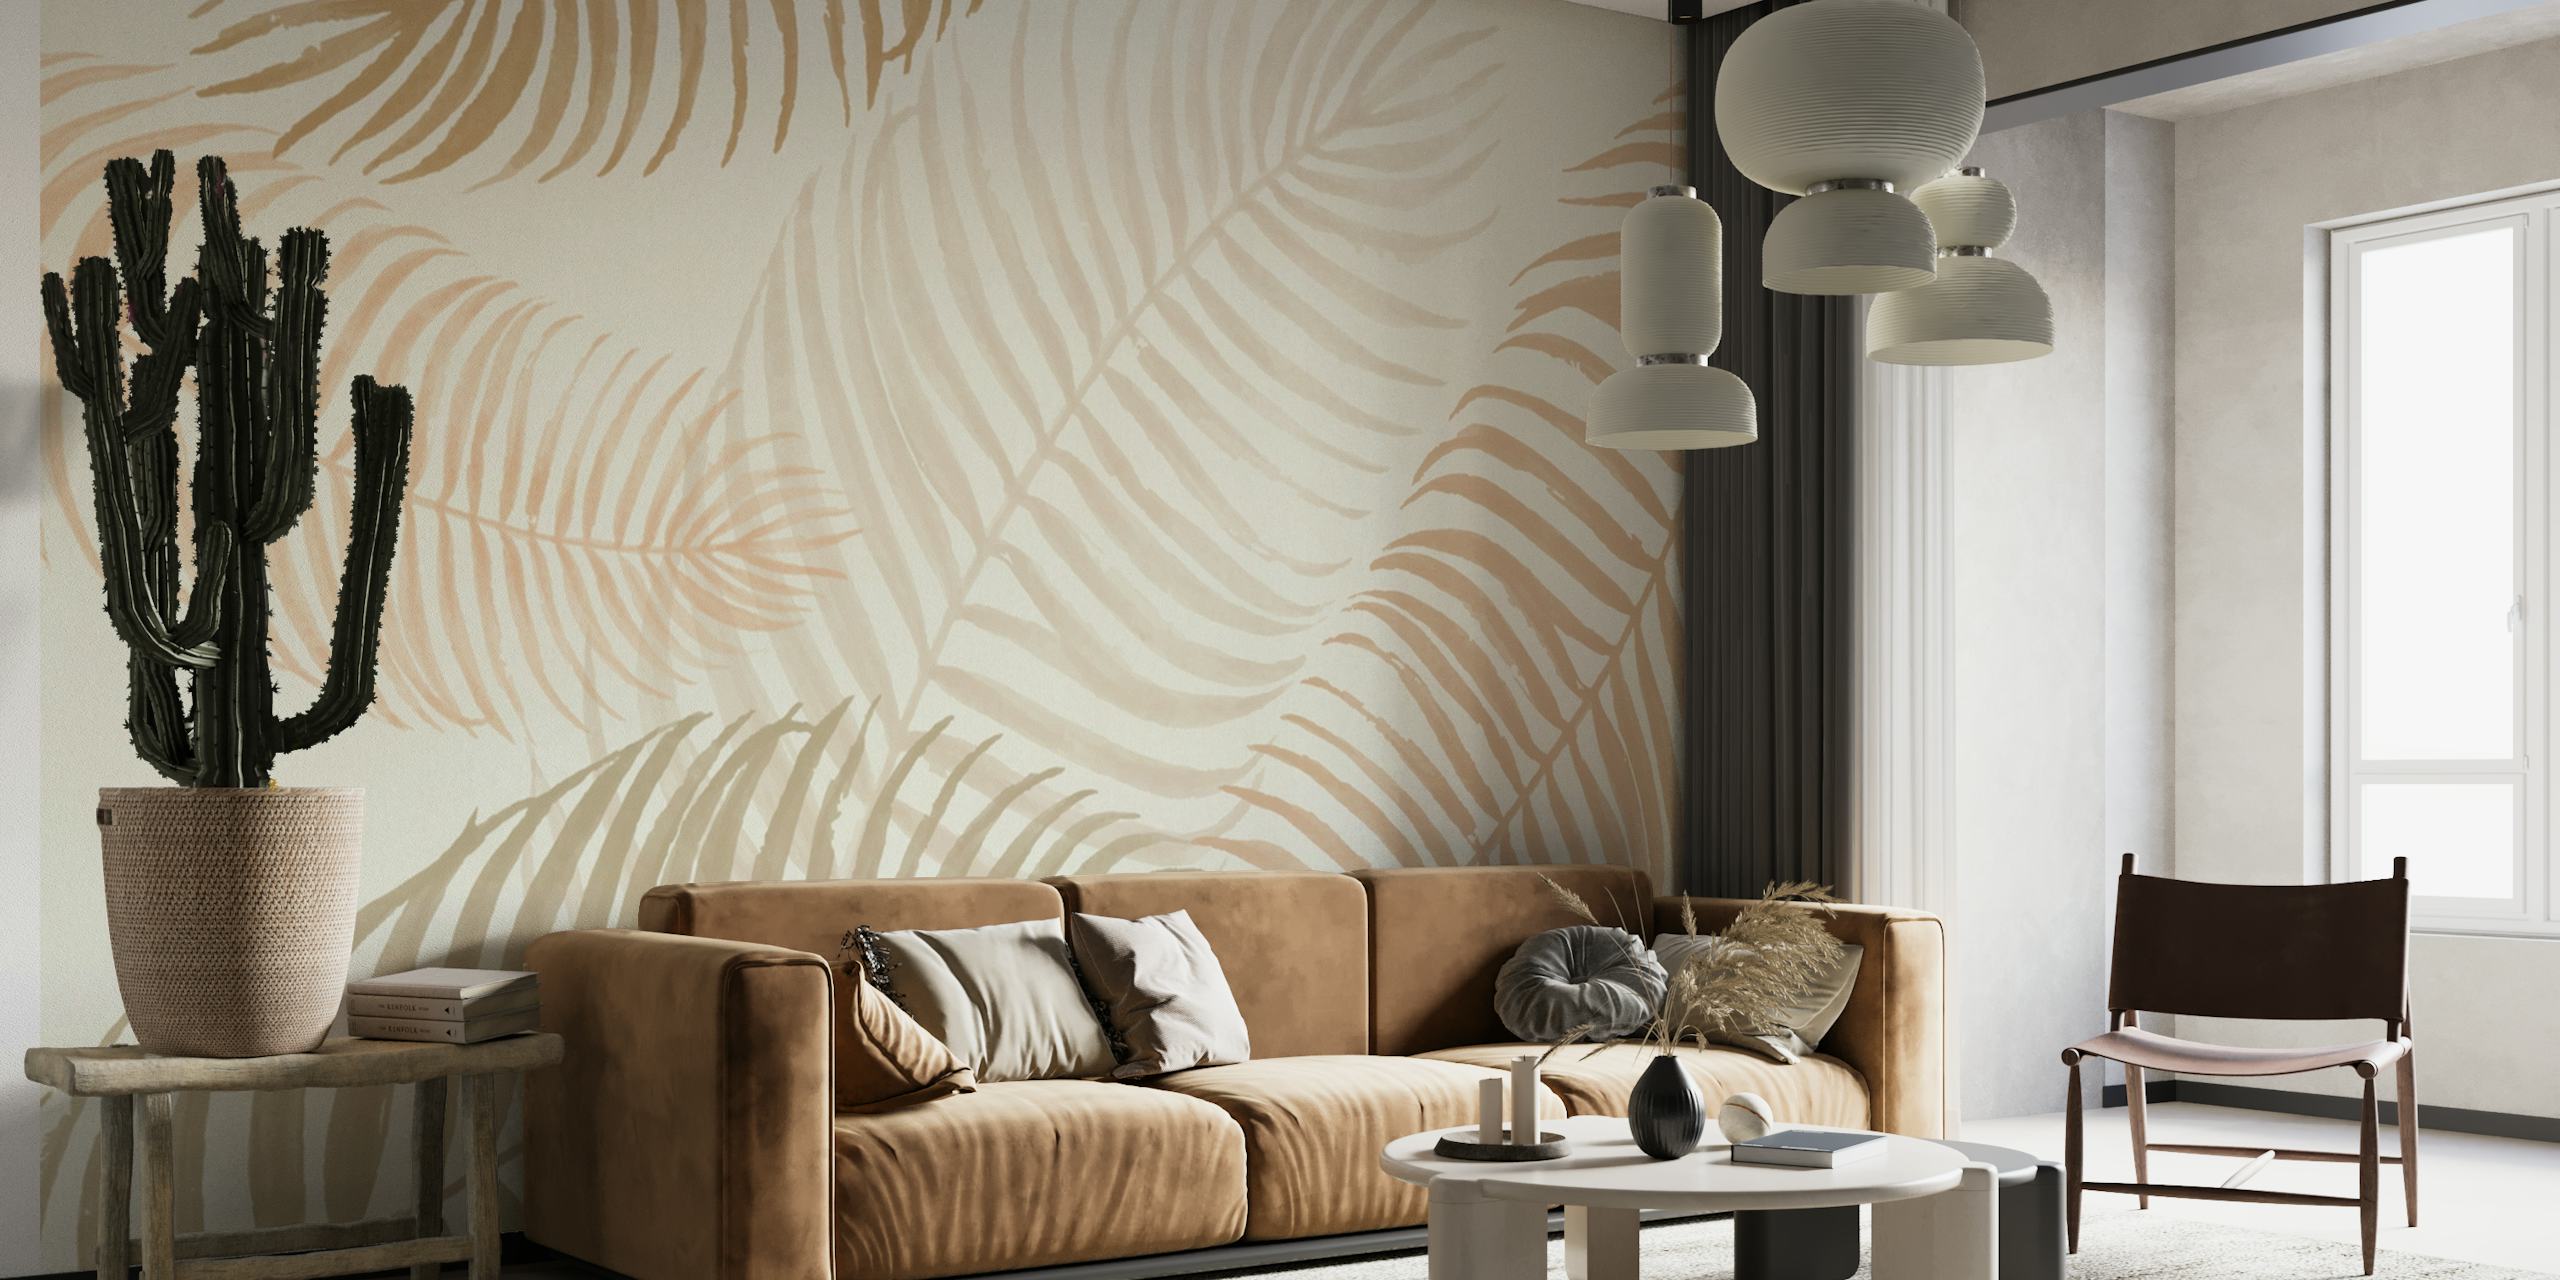 Neutral Palm Leaves Wall Mural with soft beige and off-white tones